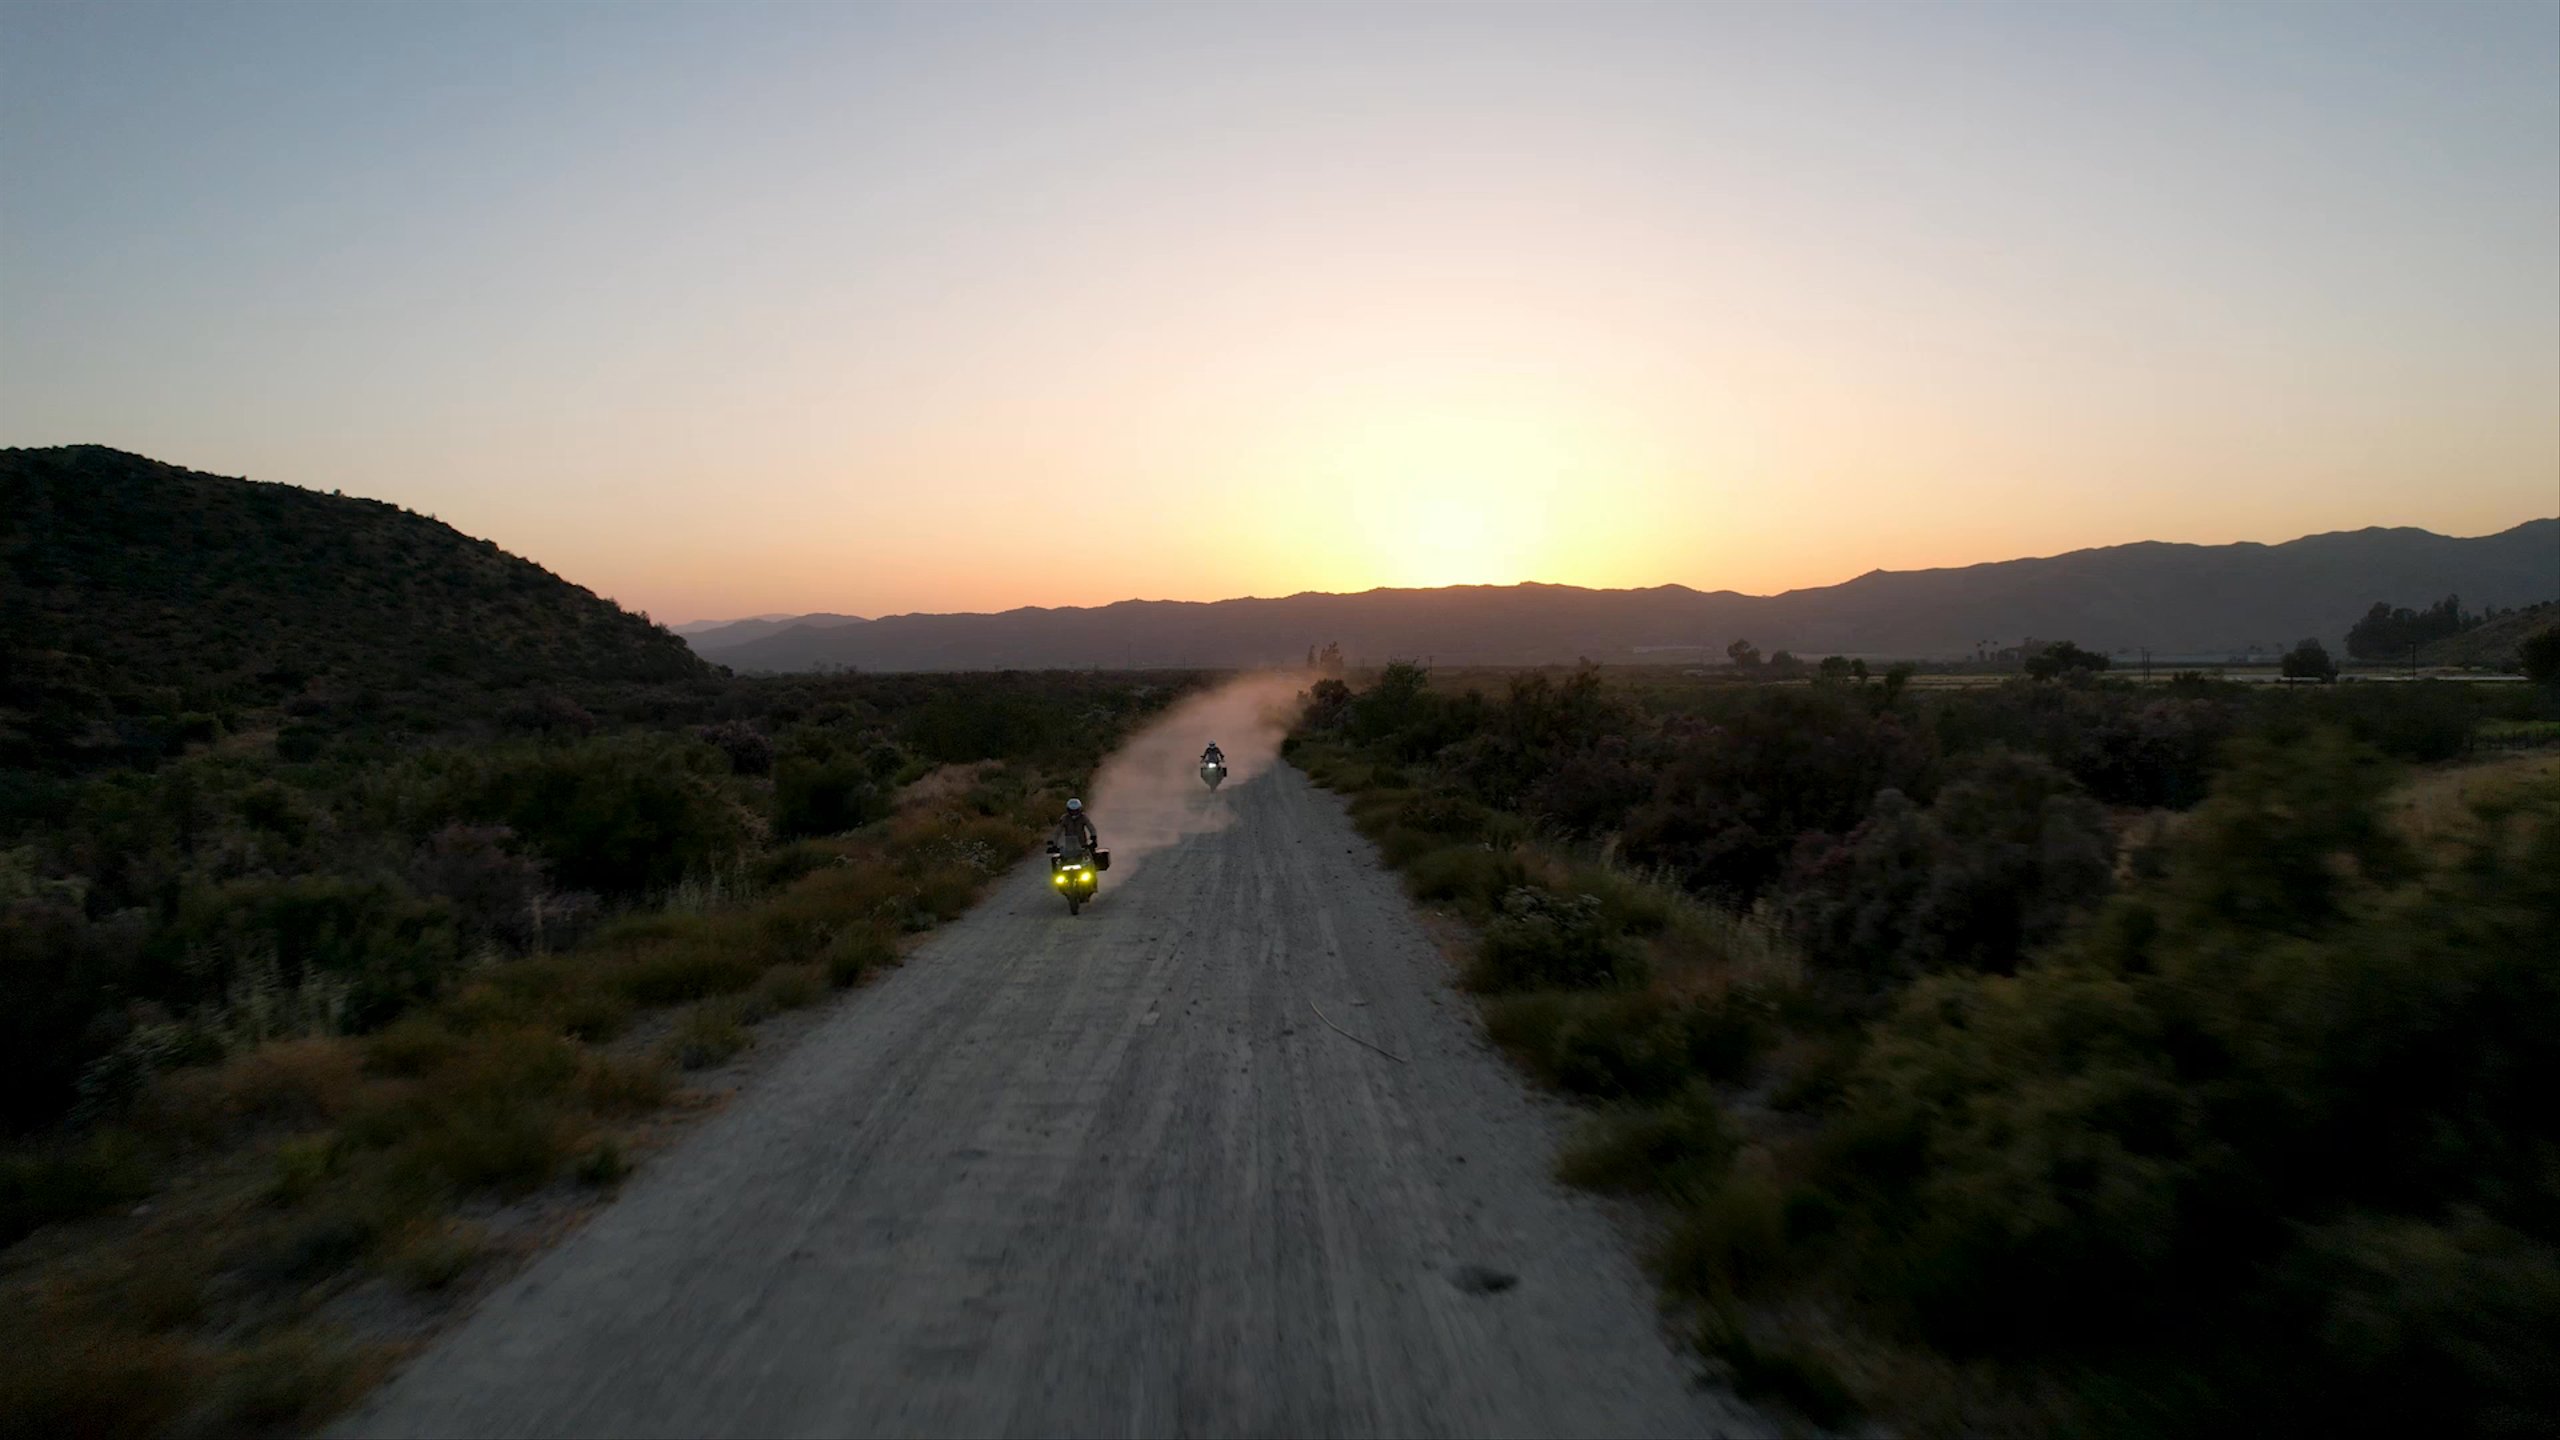 Video of motorcyclists riding down dirt road at sunset in Baja California